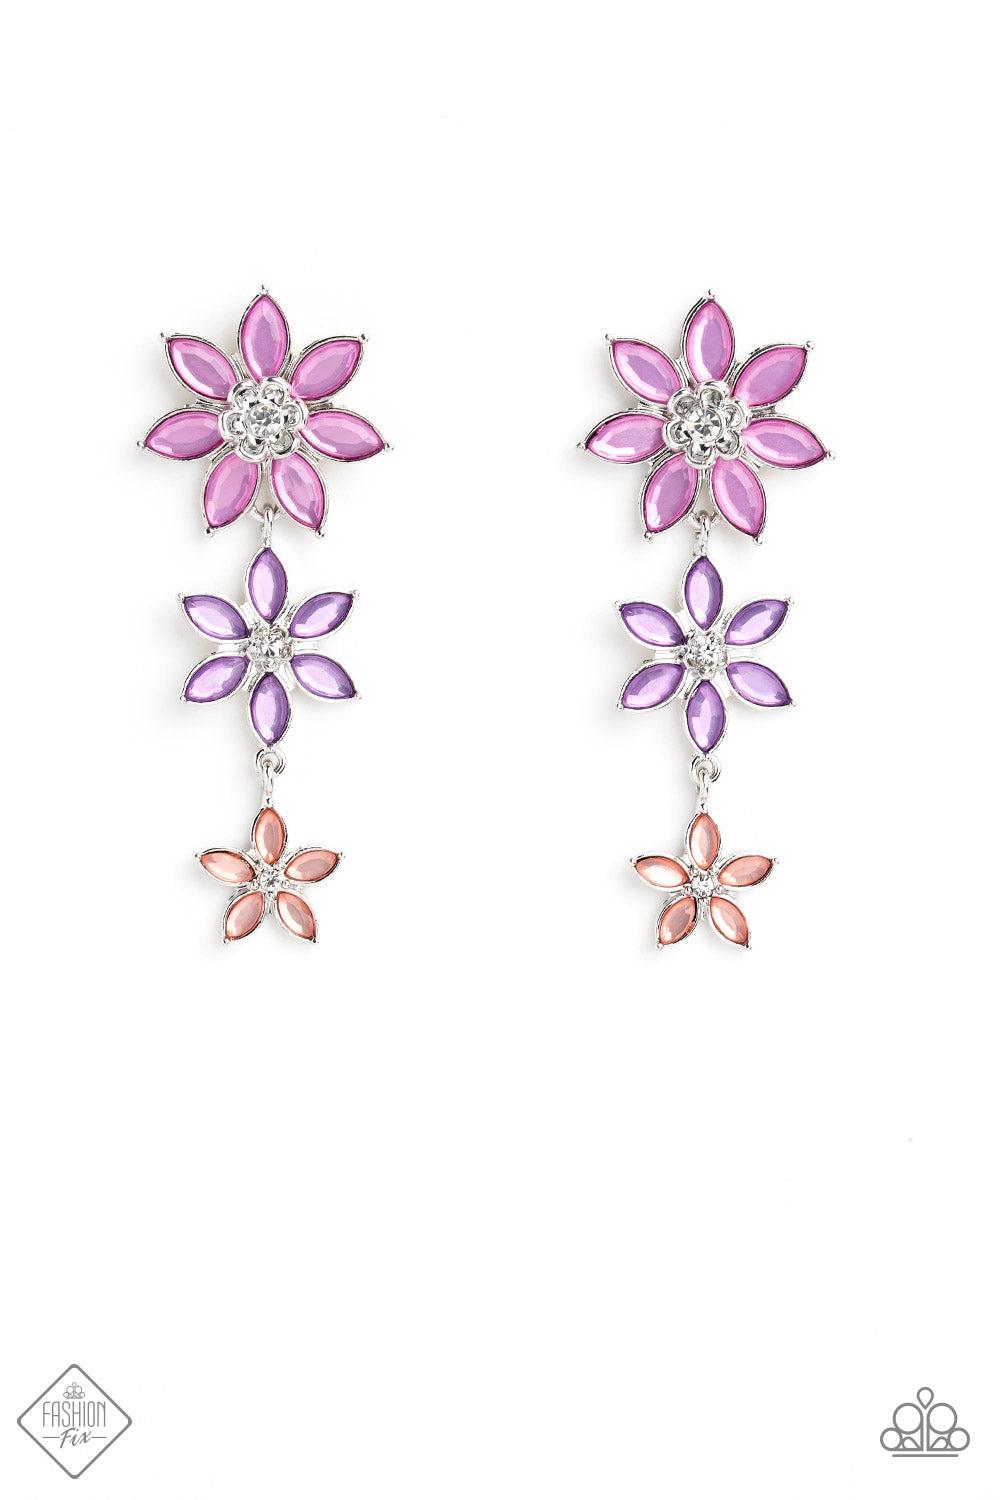 Lets Get it GARLAND Multi Flower Earrings - Paparazzi Accessories- lightbox - CarasShop.com - $5 Jewelry by Cara Jewels